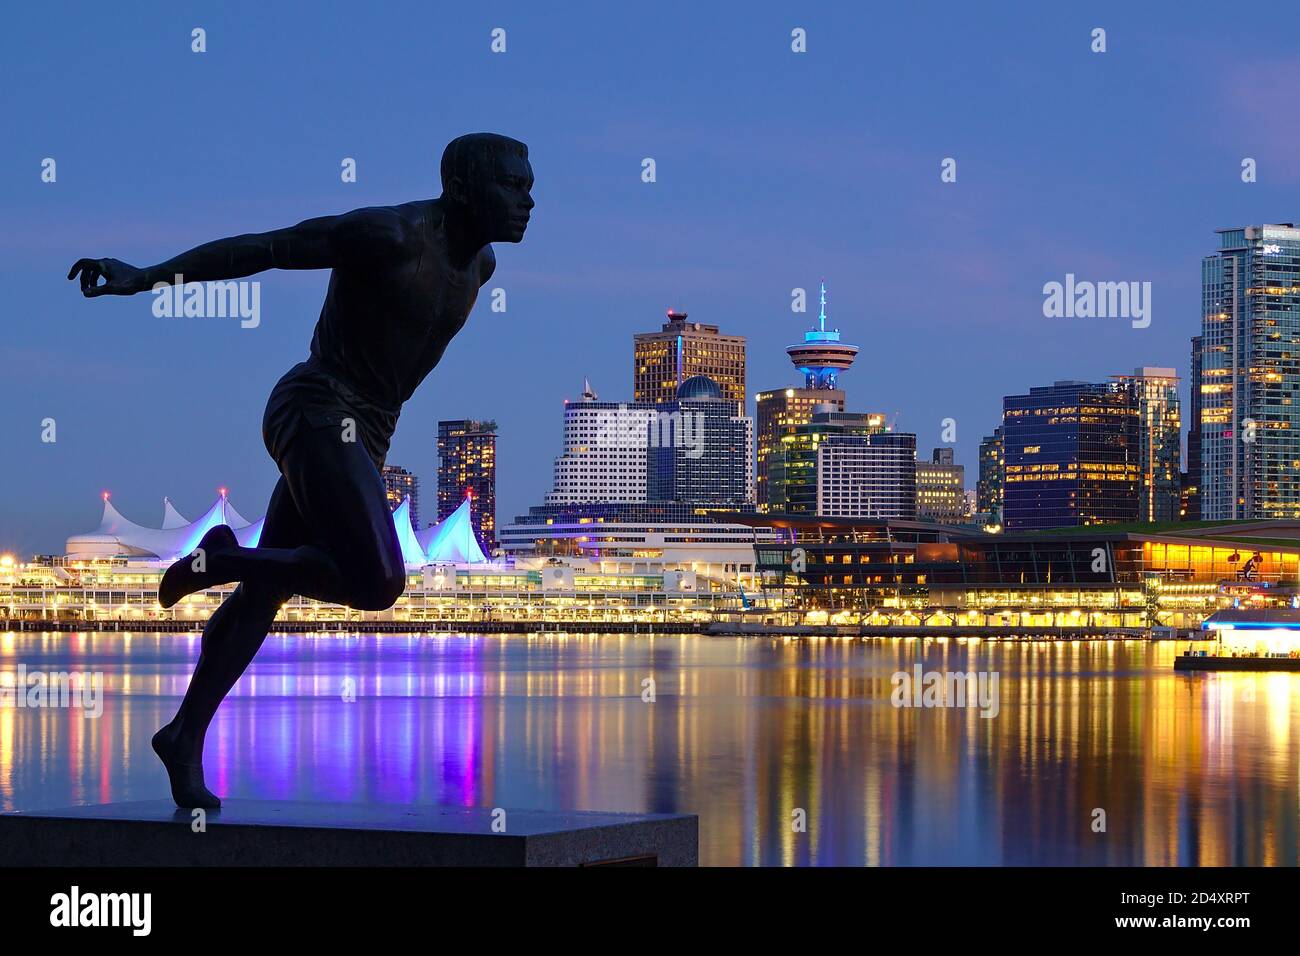 Vancouver, British Columbia - May 14, 2020 - Sprinter statue (Harry Jerome) in Stanley Park with Vancouver Downtown night skyline in the background, b Stock Photo